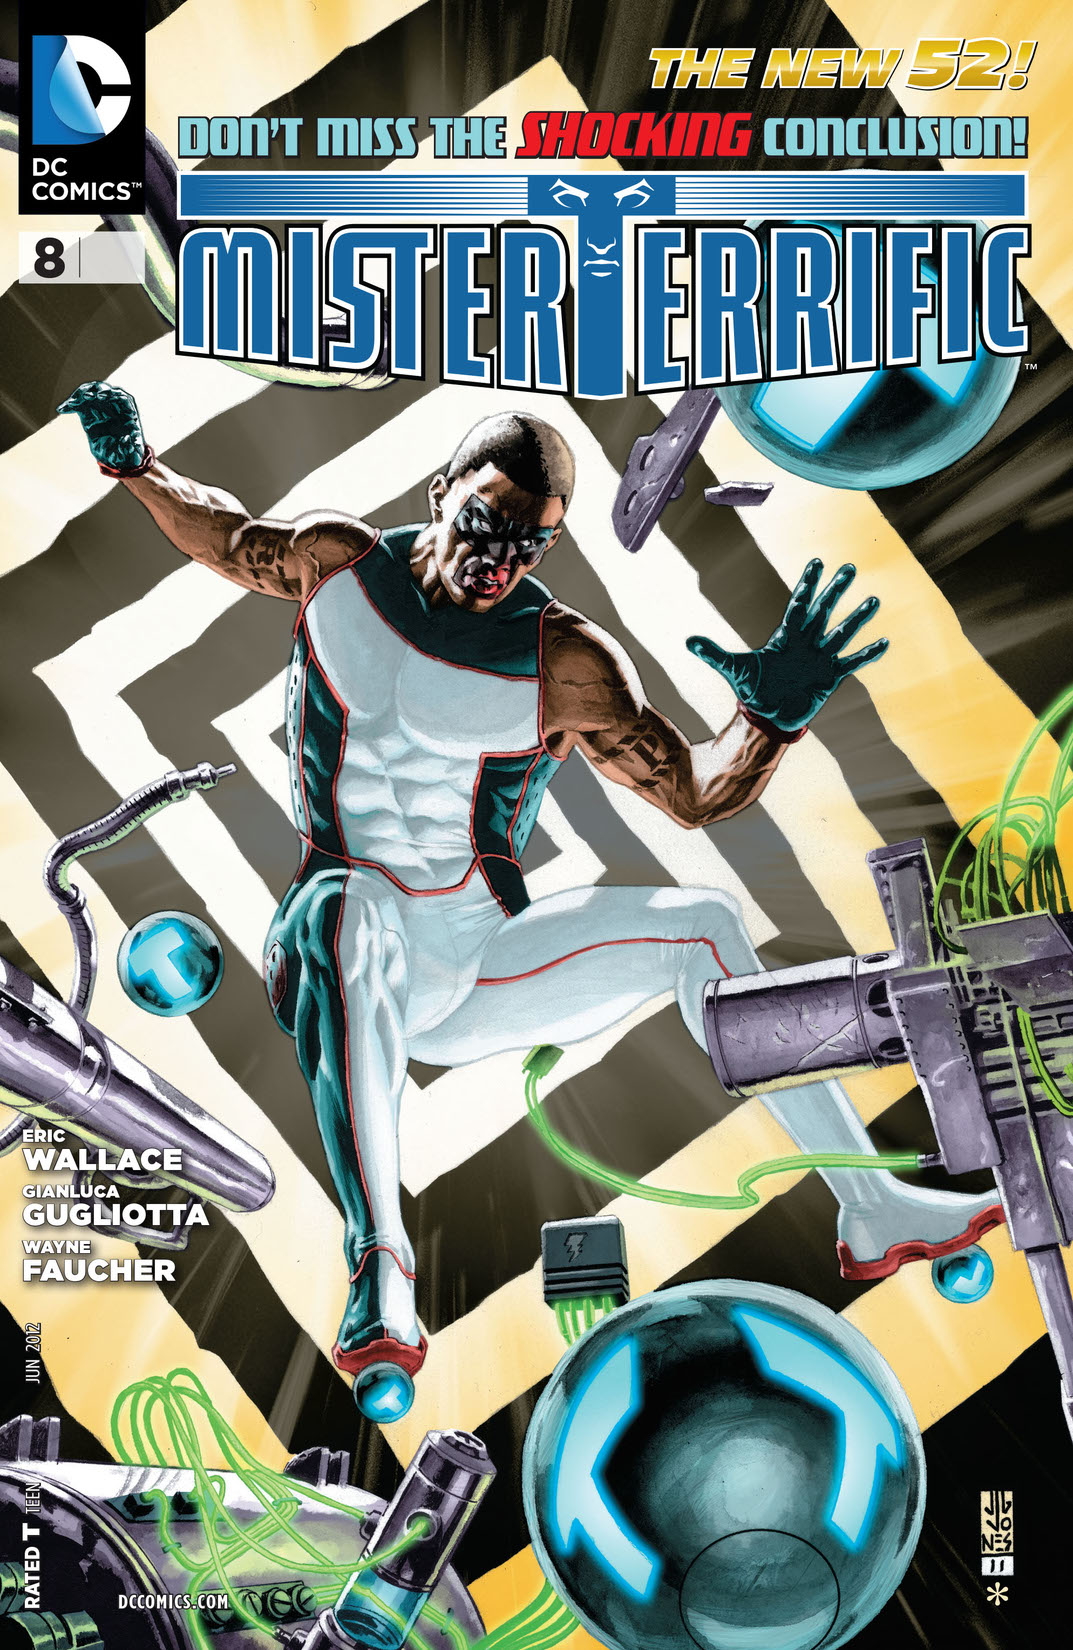 Mister Terrific #8 preview images